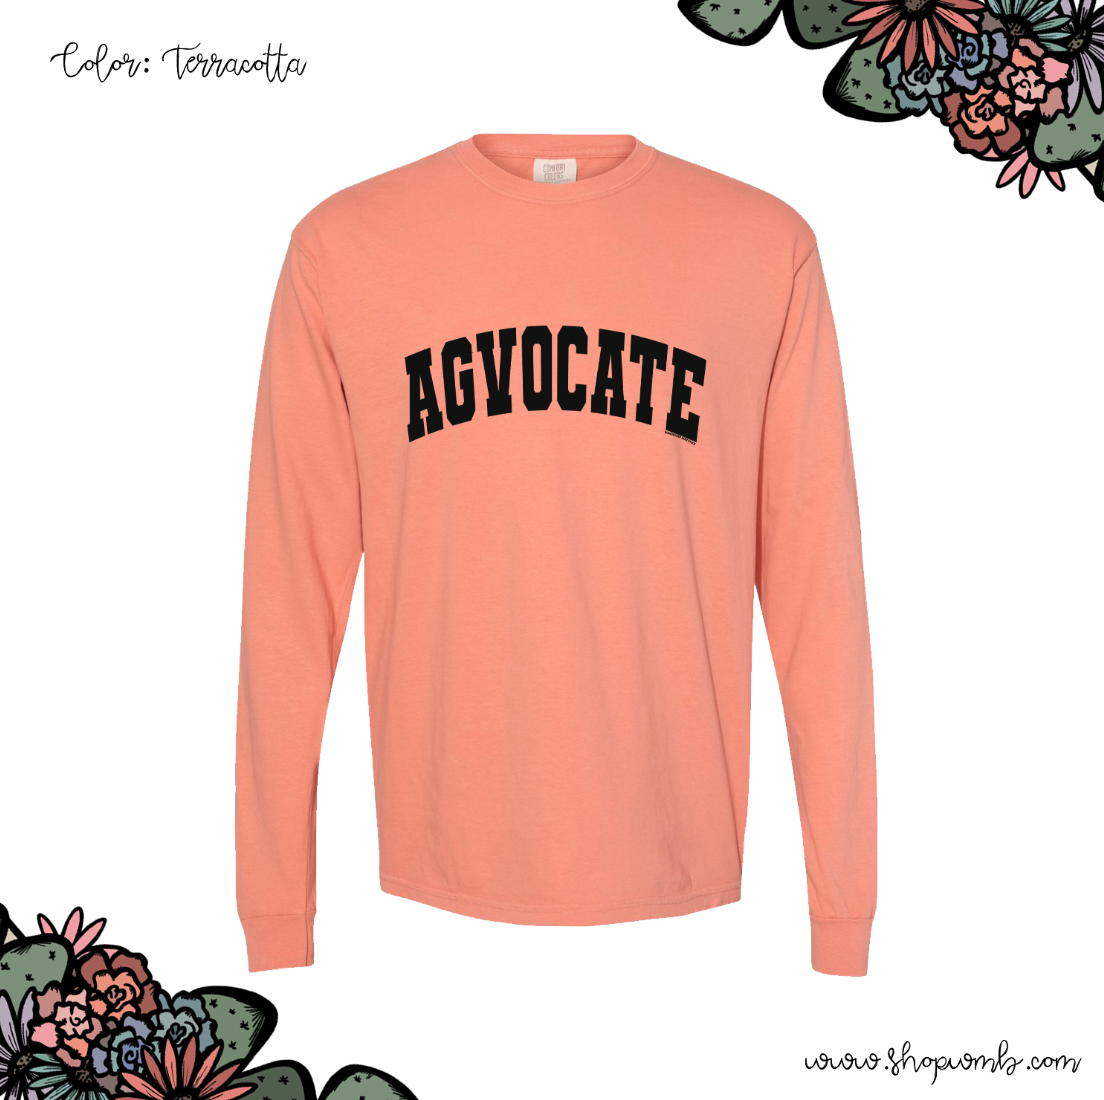 Varsity Agvocate Black Ink LONG SLEEVE T-Shirt (S-3XL) - Multiple Colors!